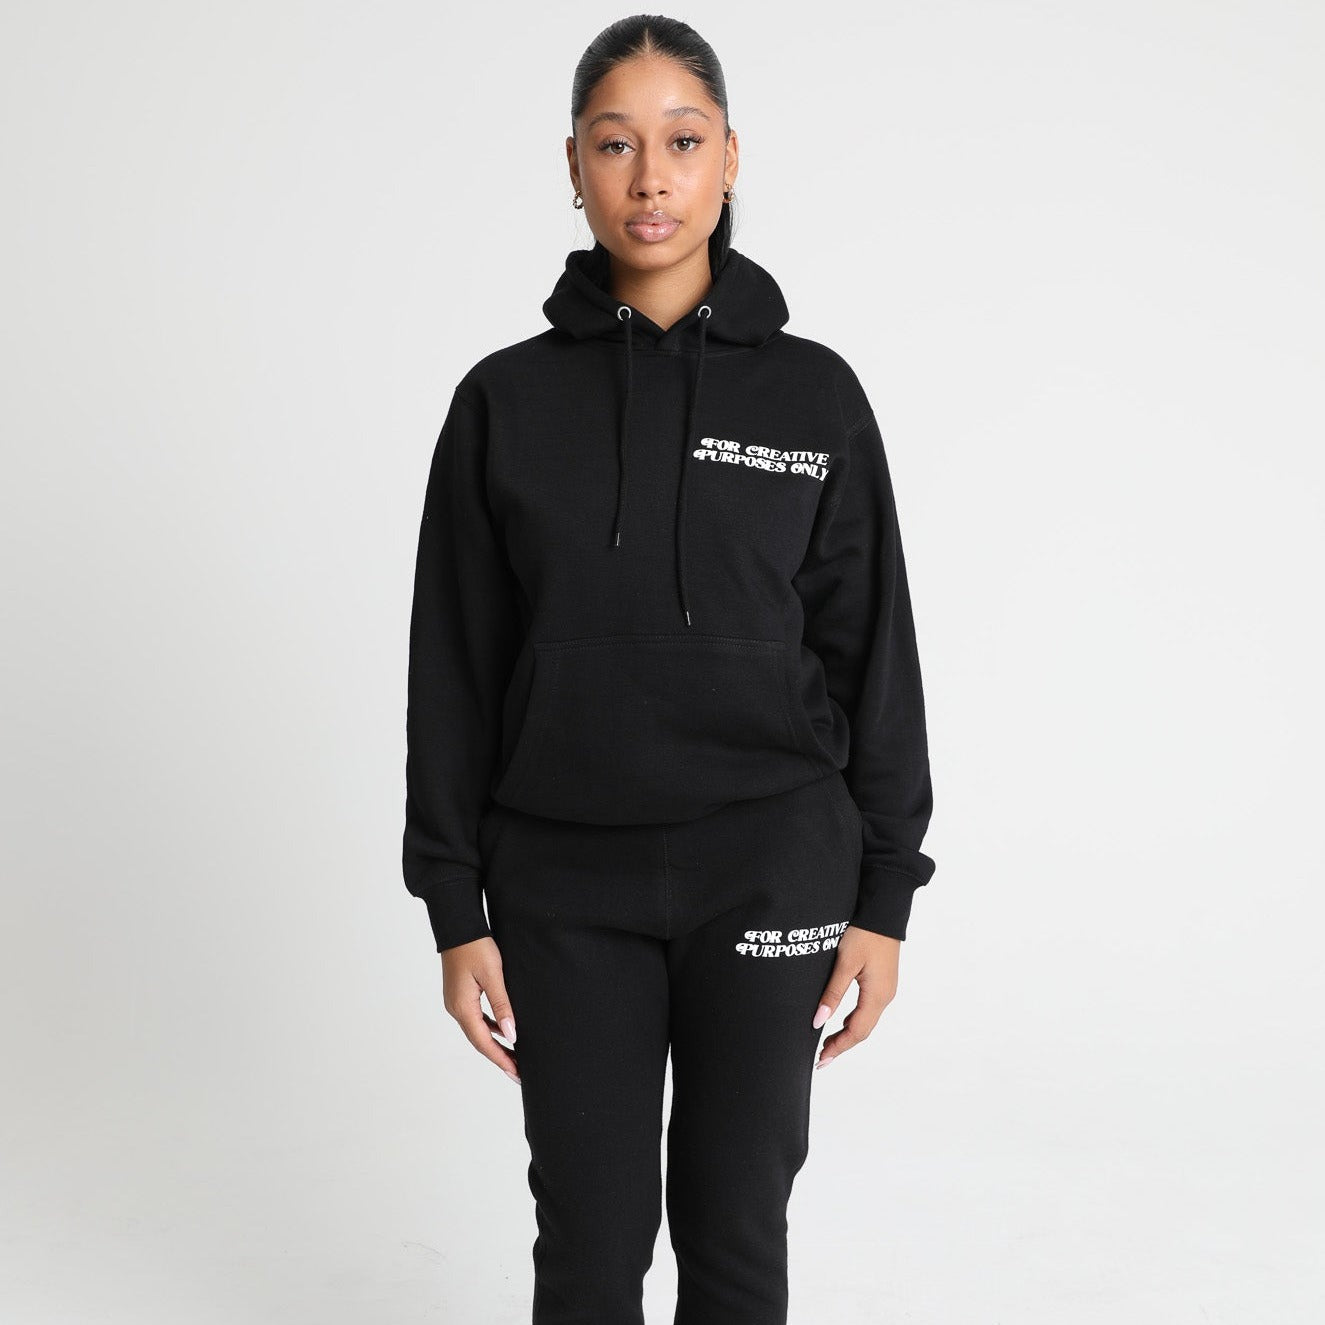 For Creative Purposes Only - Sweatsuit (Black + White)